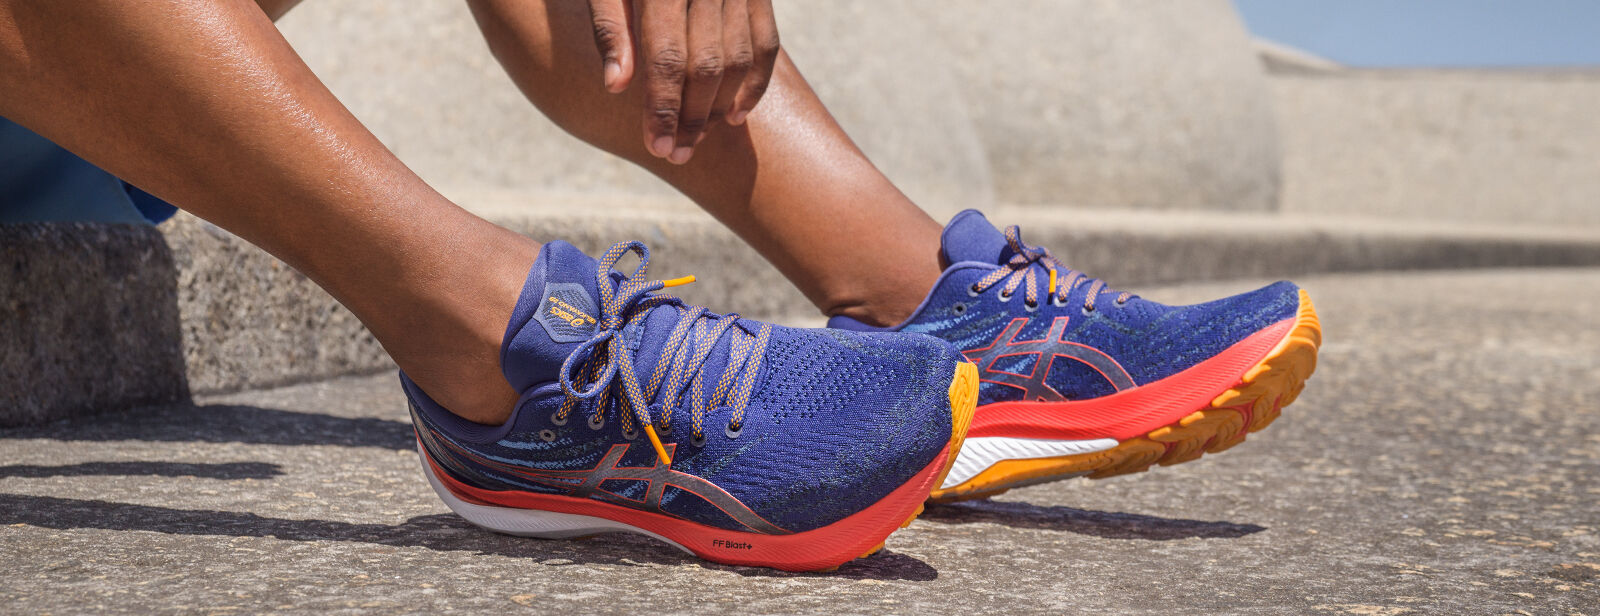 Are Asics Shoes Good For Wide Feet?